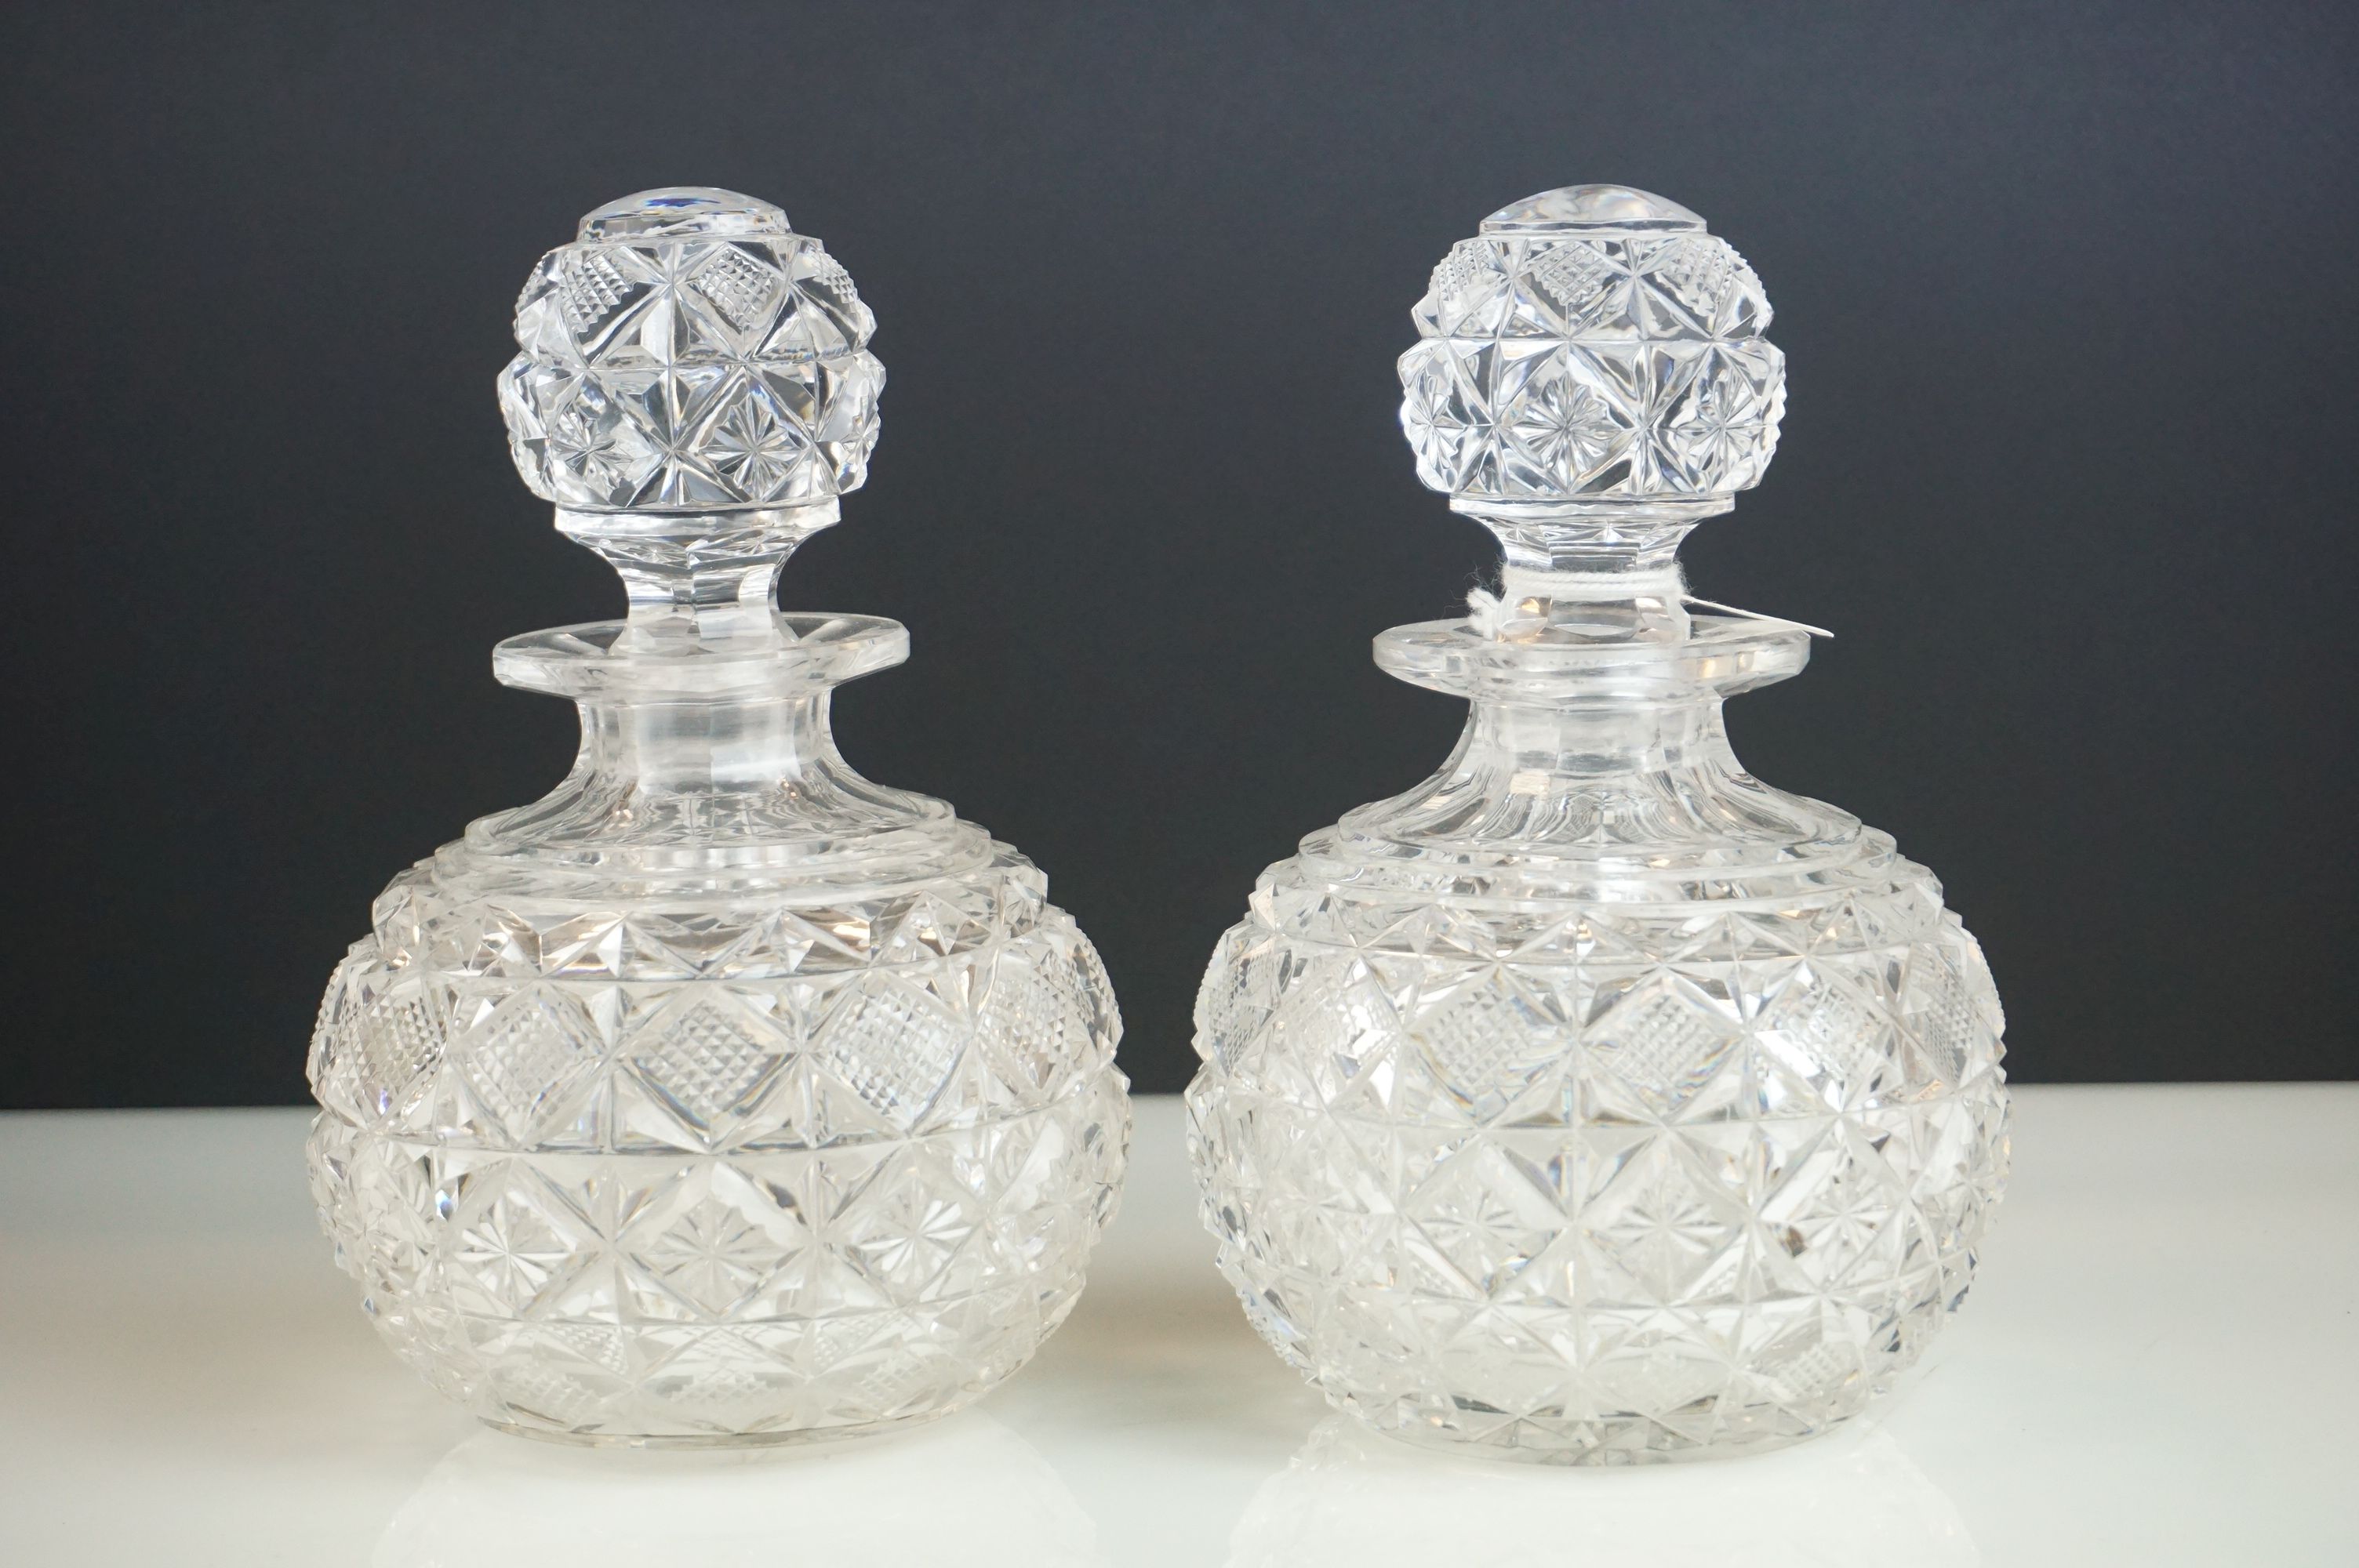 Collection of Glassware including Pair of Cut Glass Perfume Bottles / Decanters, 18cms high, Jack in - Image 11 of 13